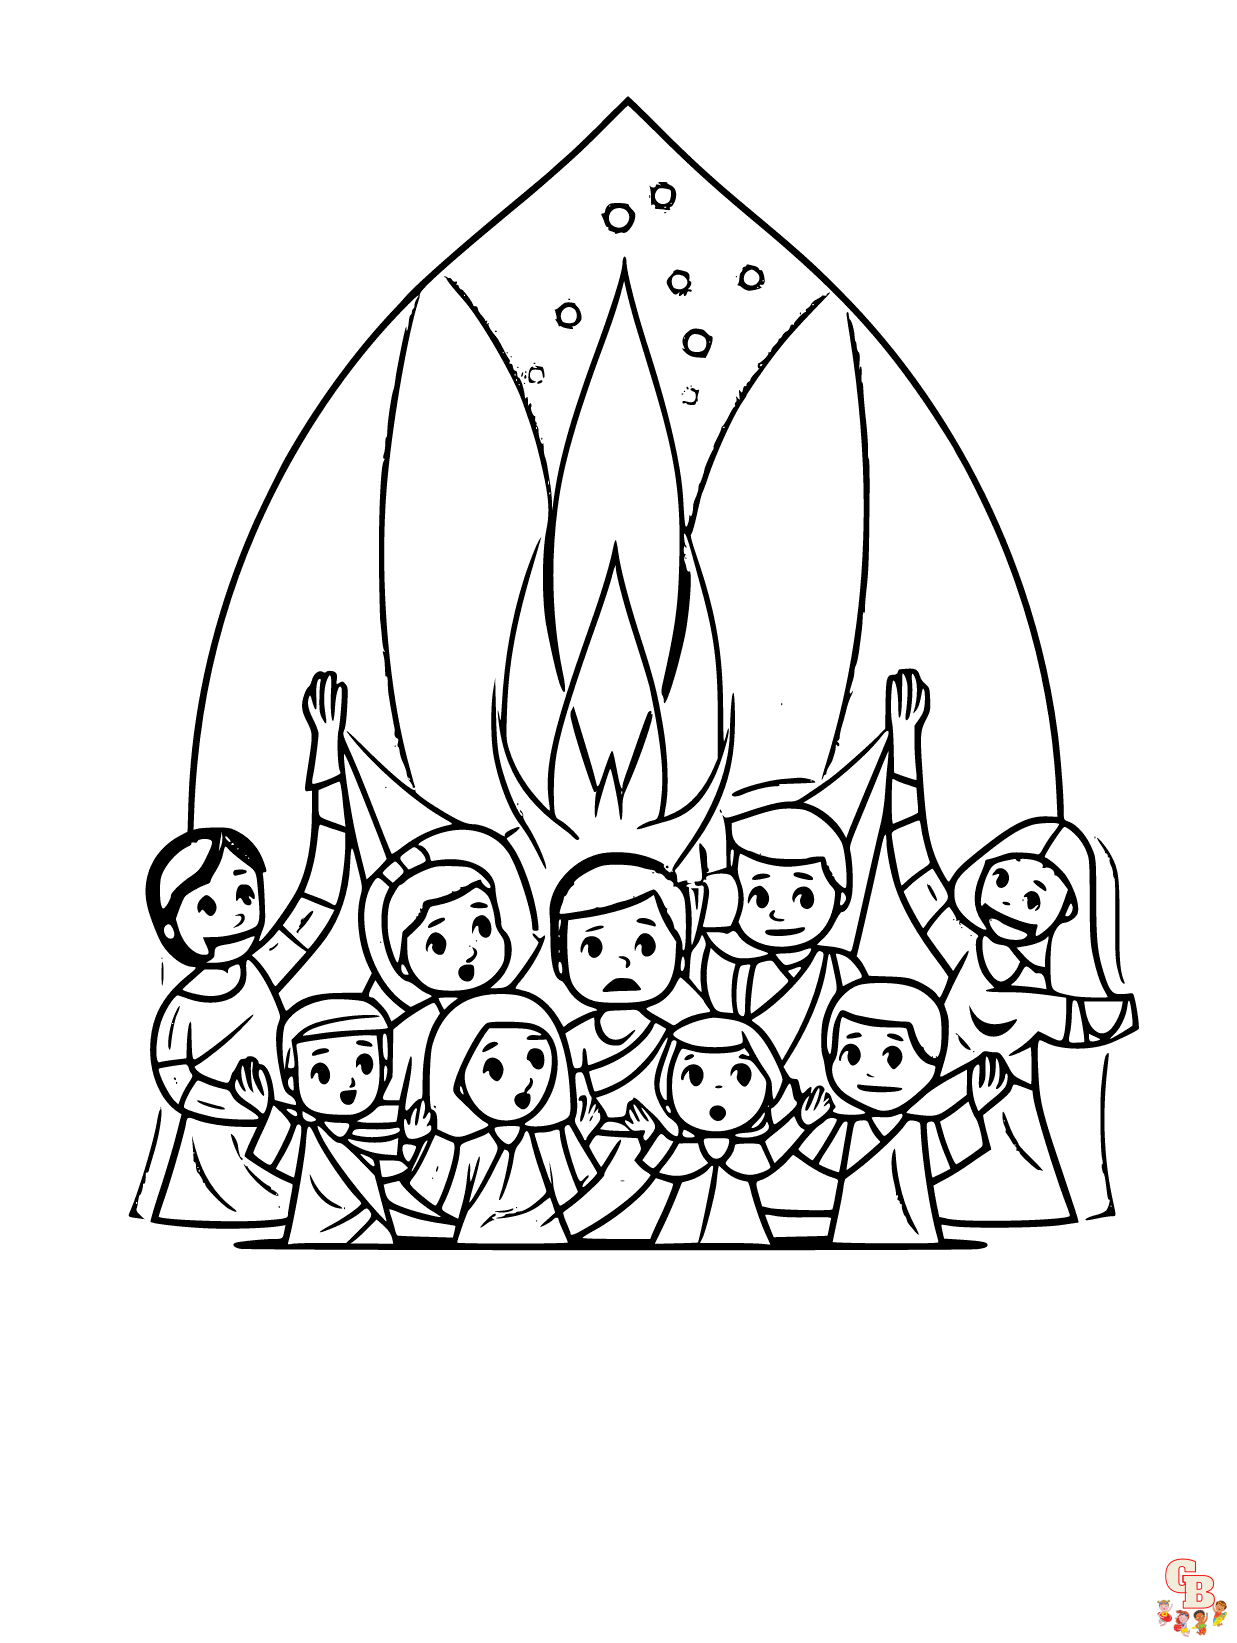 Free Pentecost coloring pages for kids